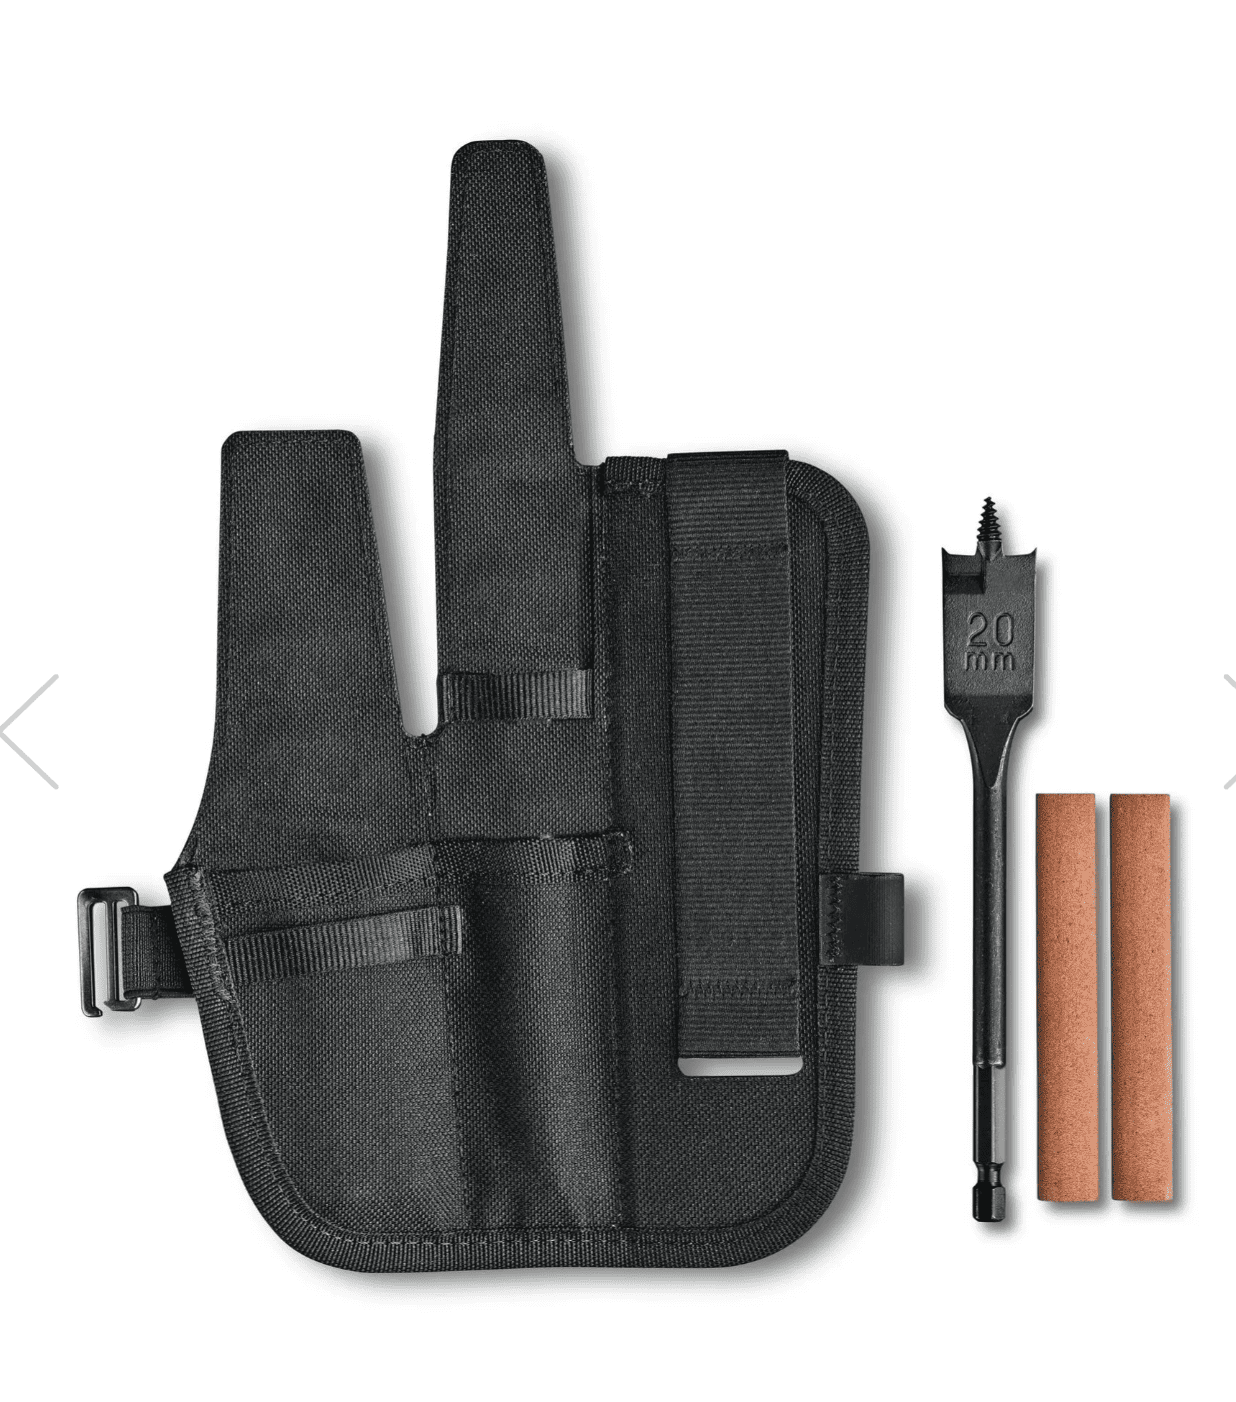 The Venture Pro Kit is designed for extended trips into the wilderness. 